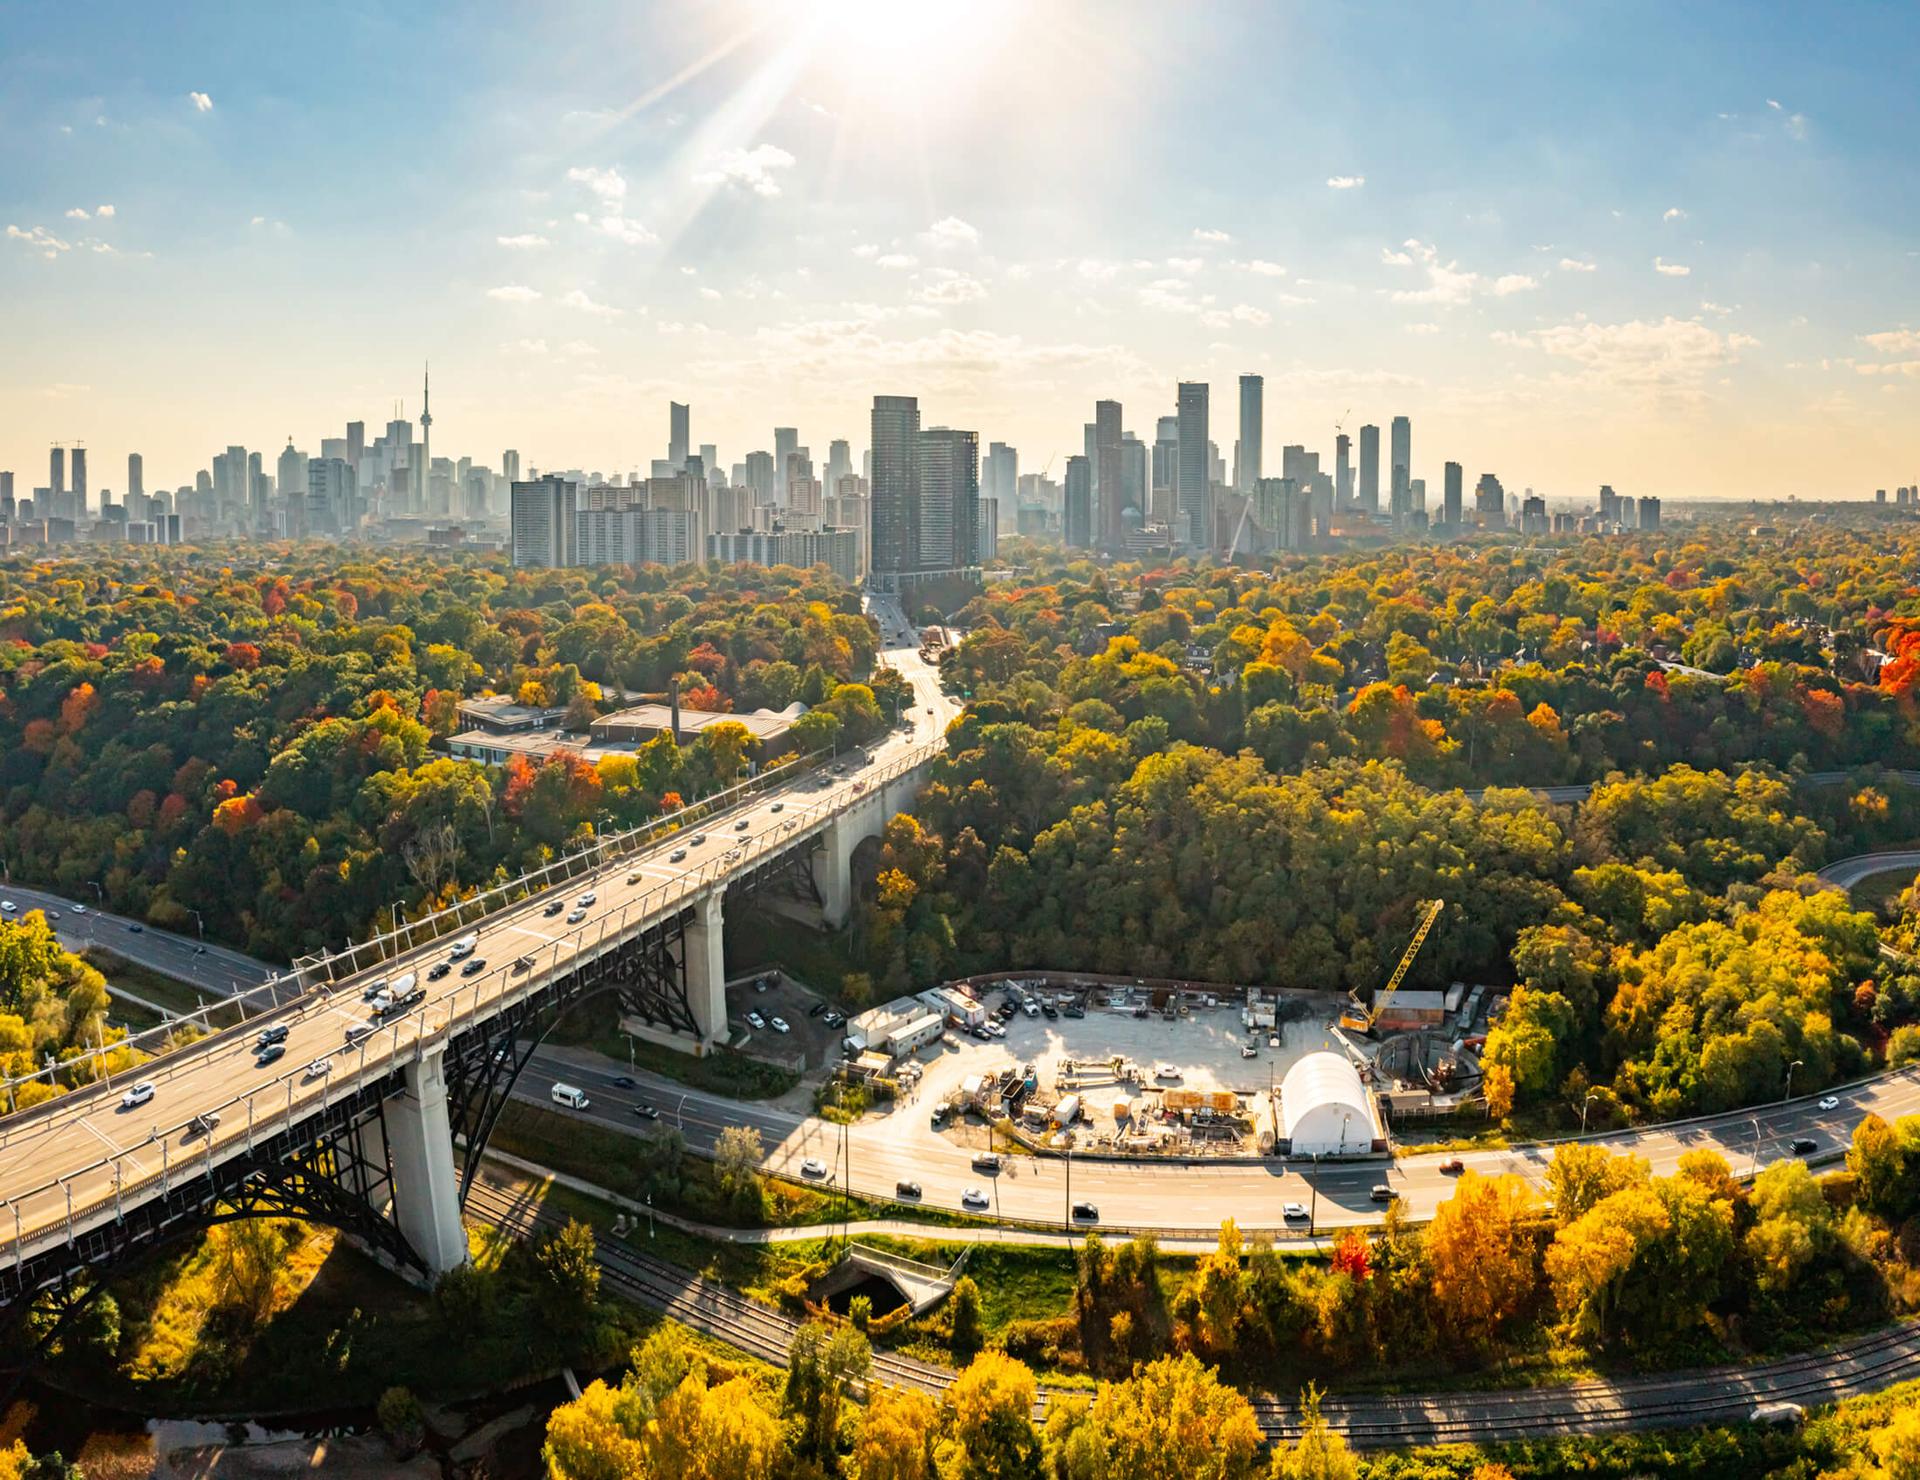 The skyline of a lush, tree-lined city, next to a highway overpass